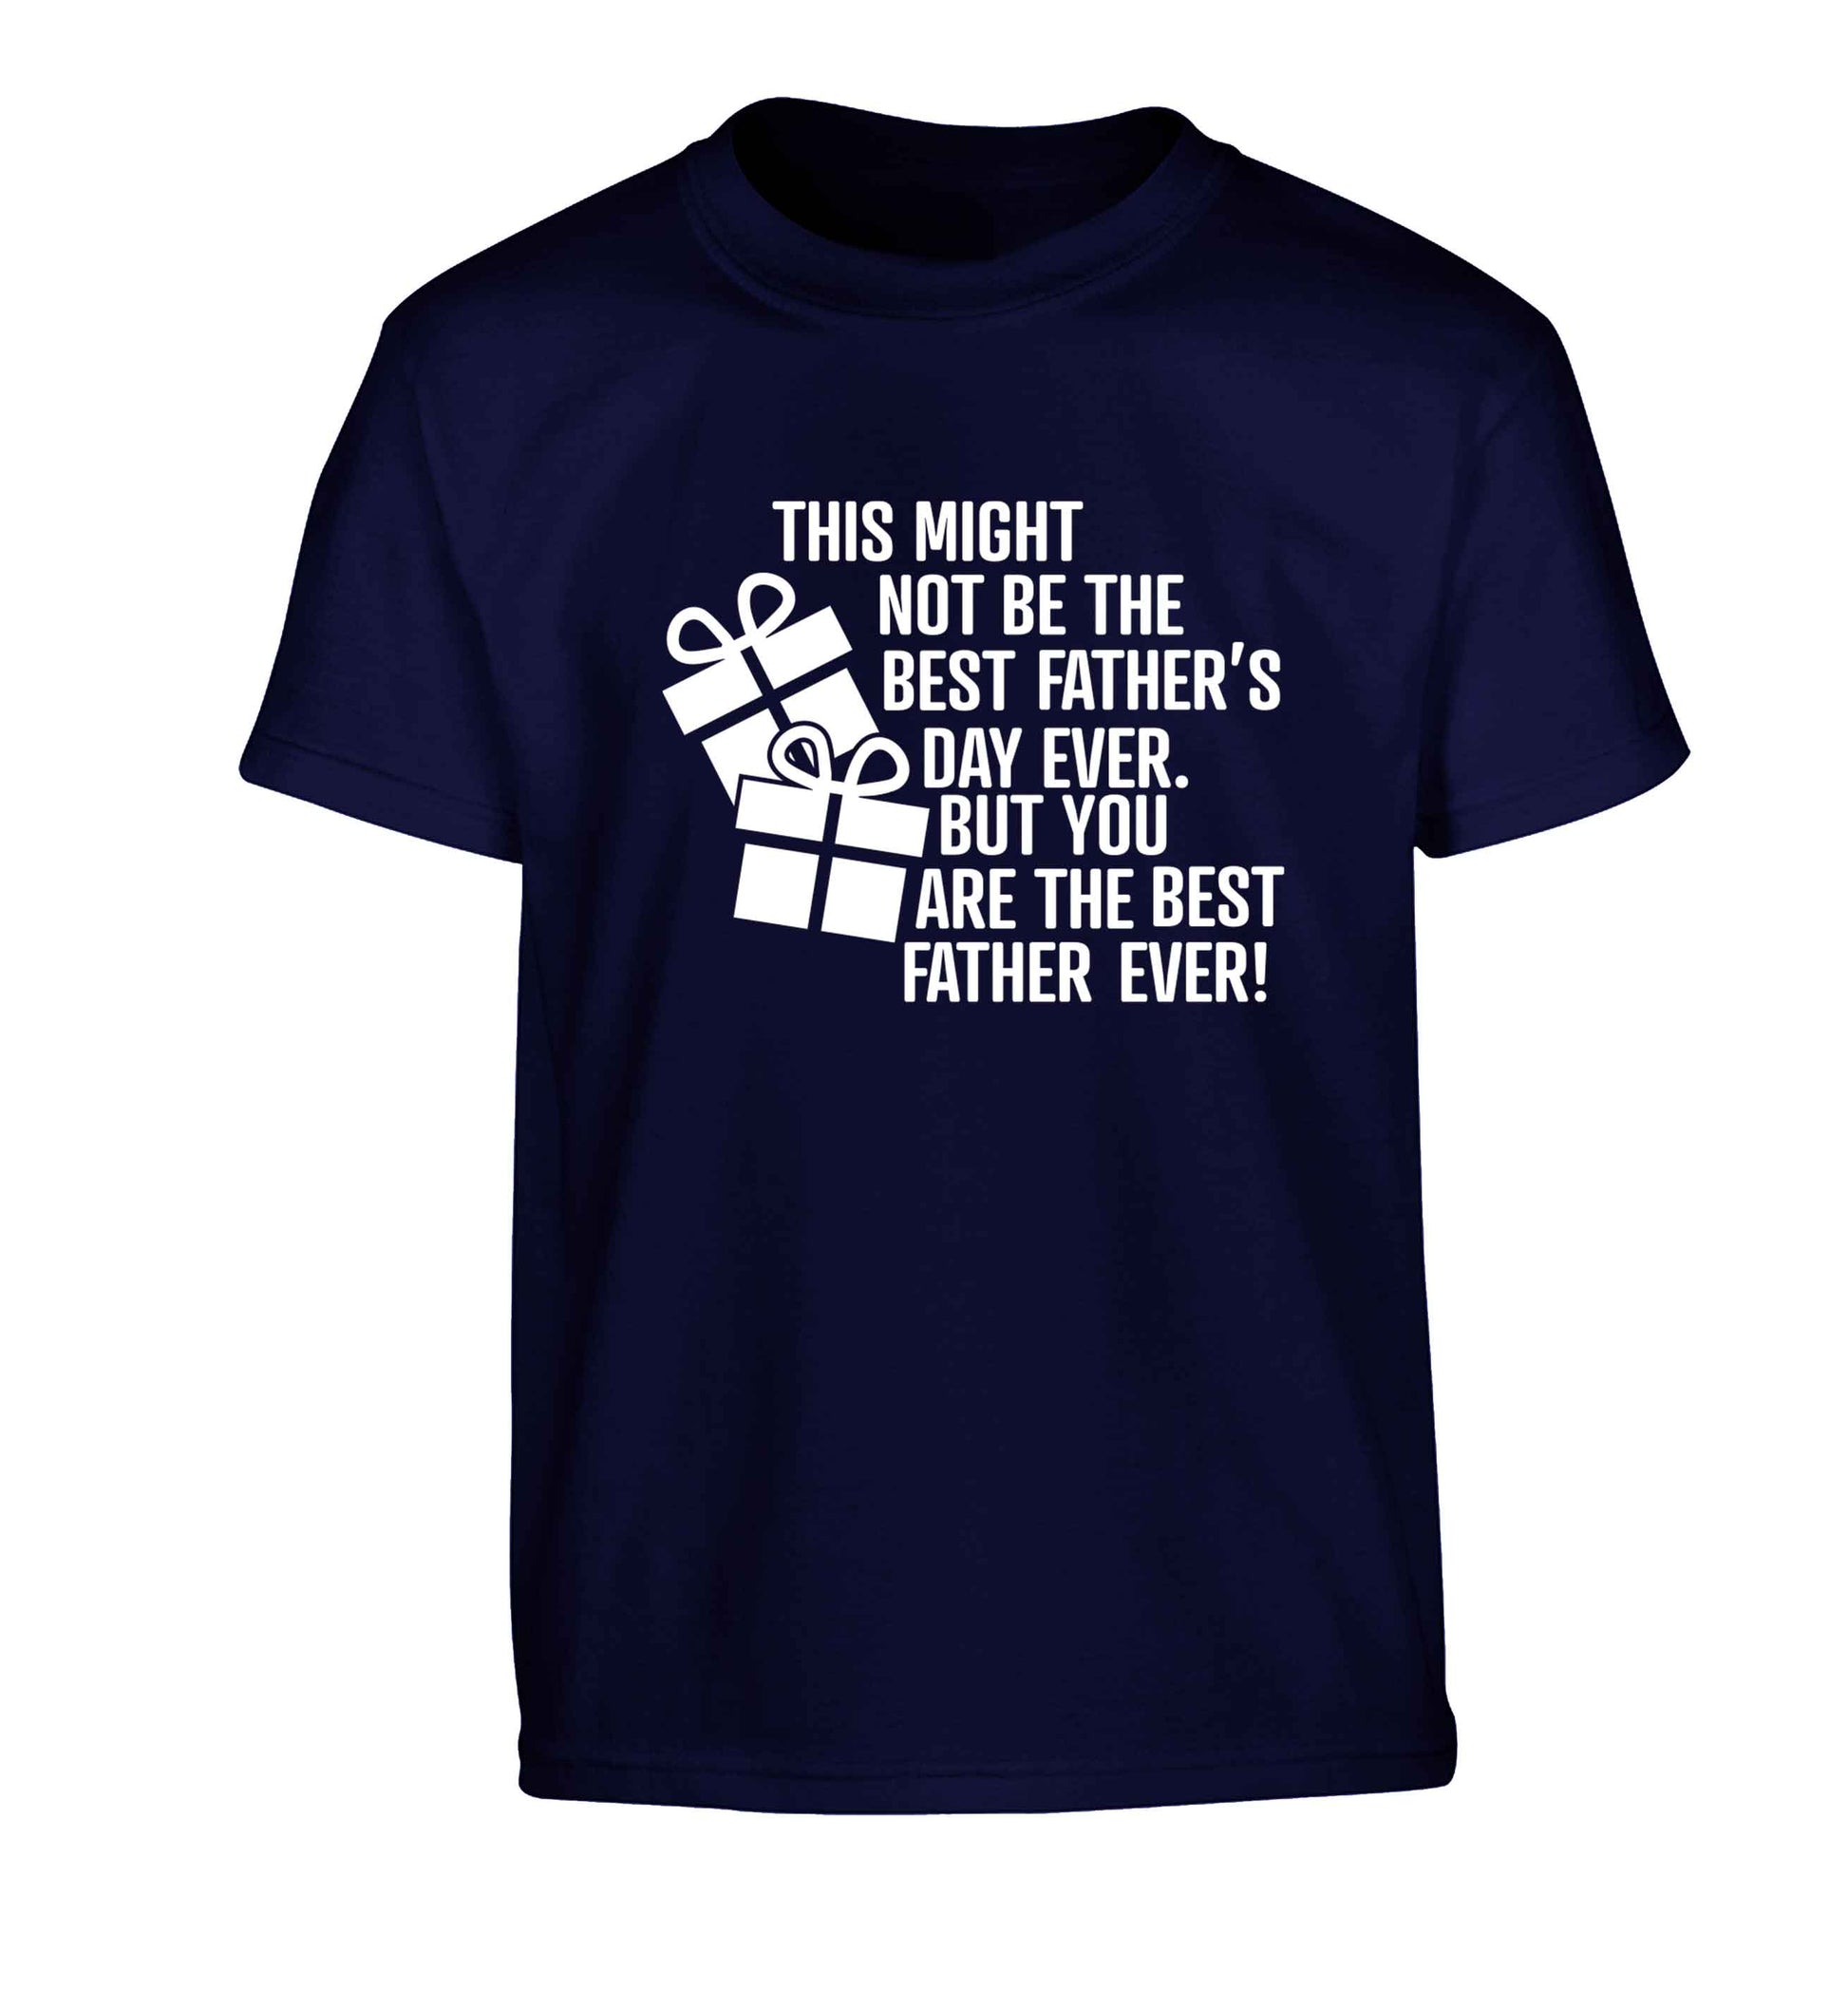 It might not be the best Father's Day ever but you are the best father ever! Children's navy Tshirt 12-13 Years